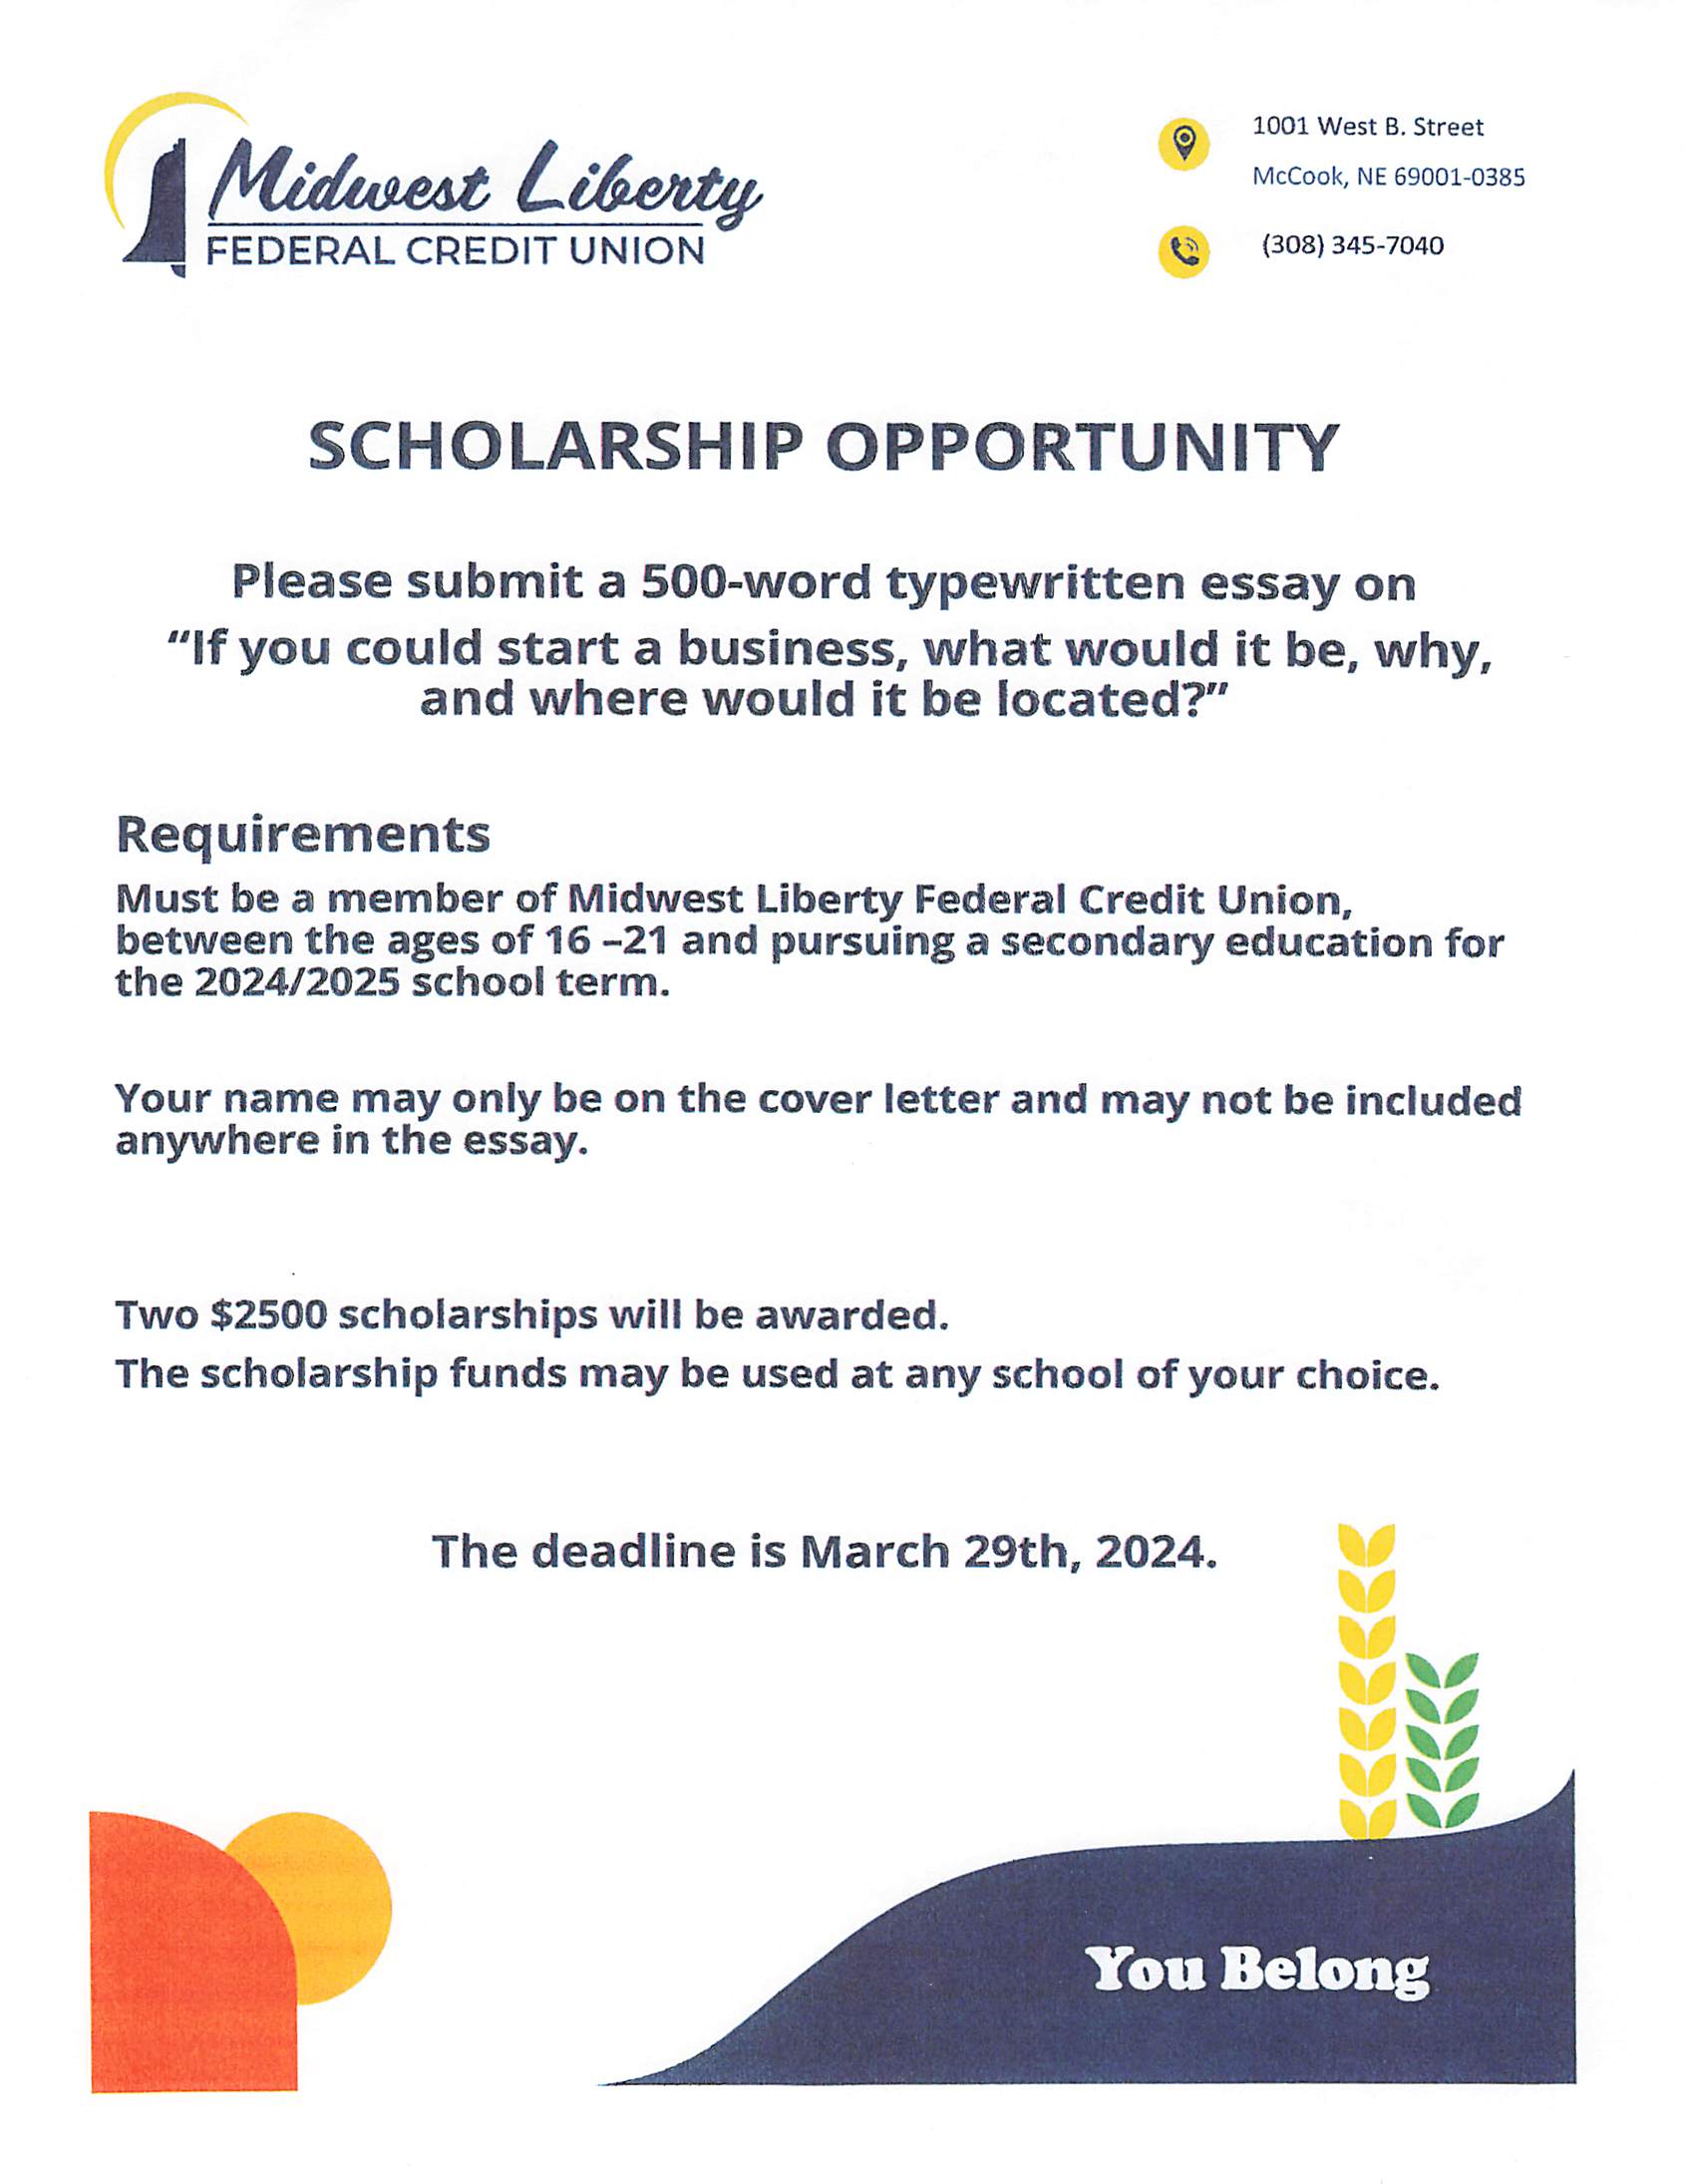 Midwest Liberty Federal Credit Union Scholarship